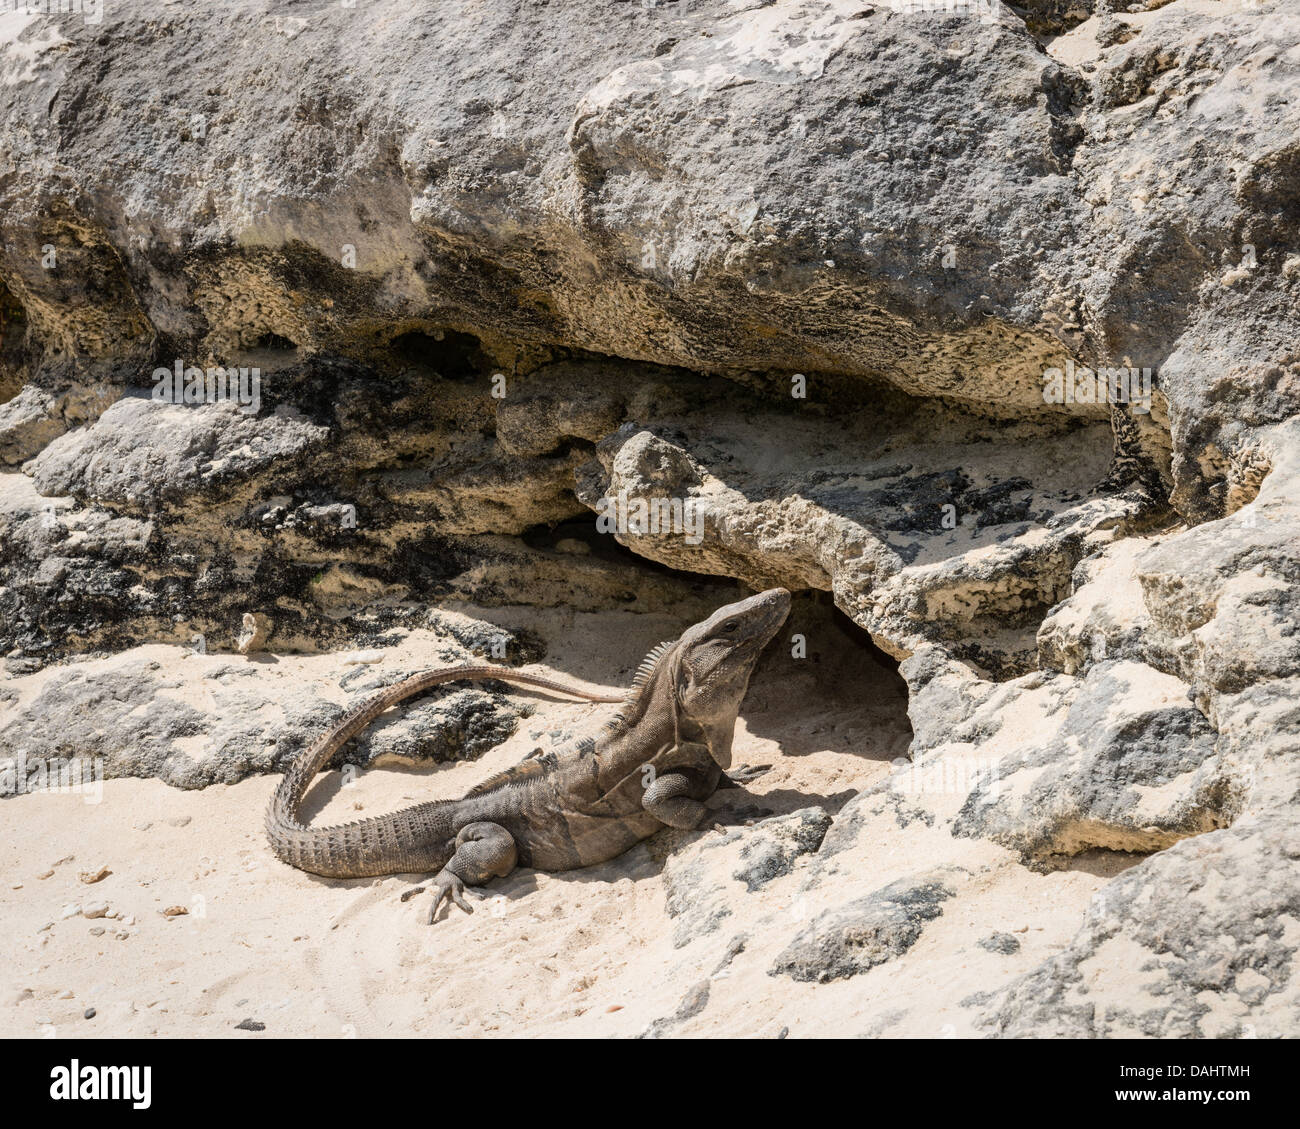 Iguana sunning itself by the rocks on a beach in Cozumel, Mexico. Stock Photo